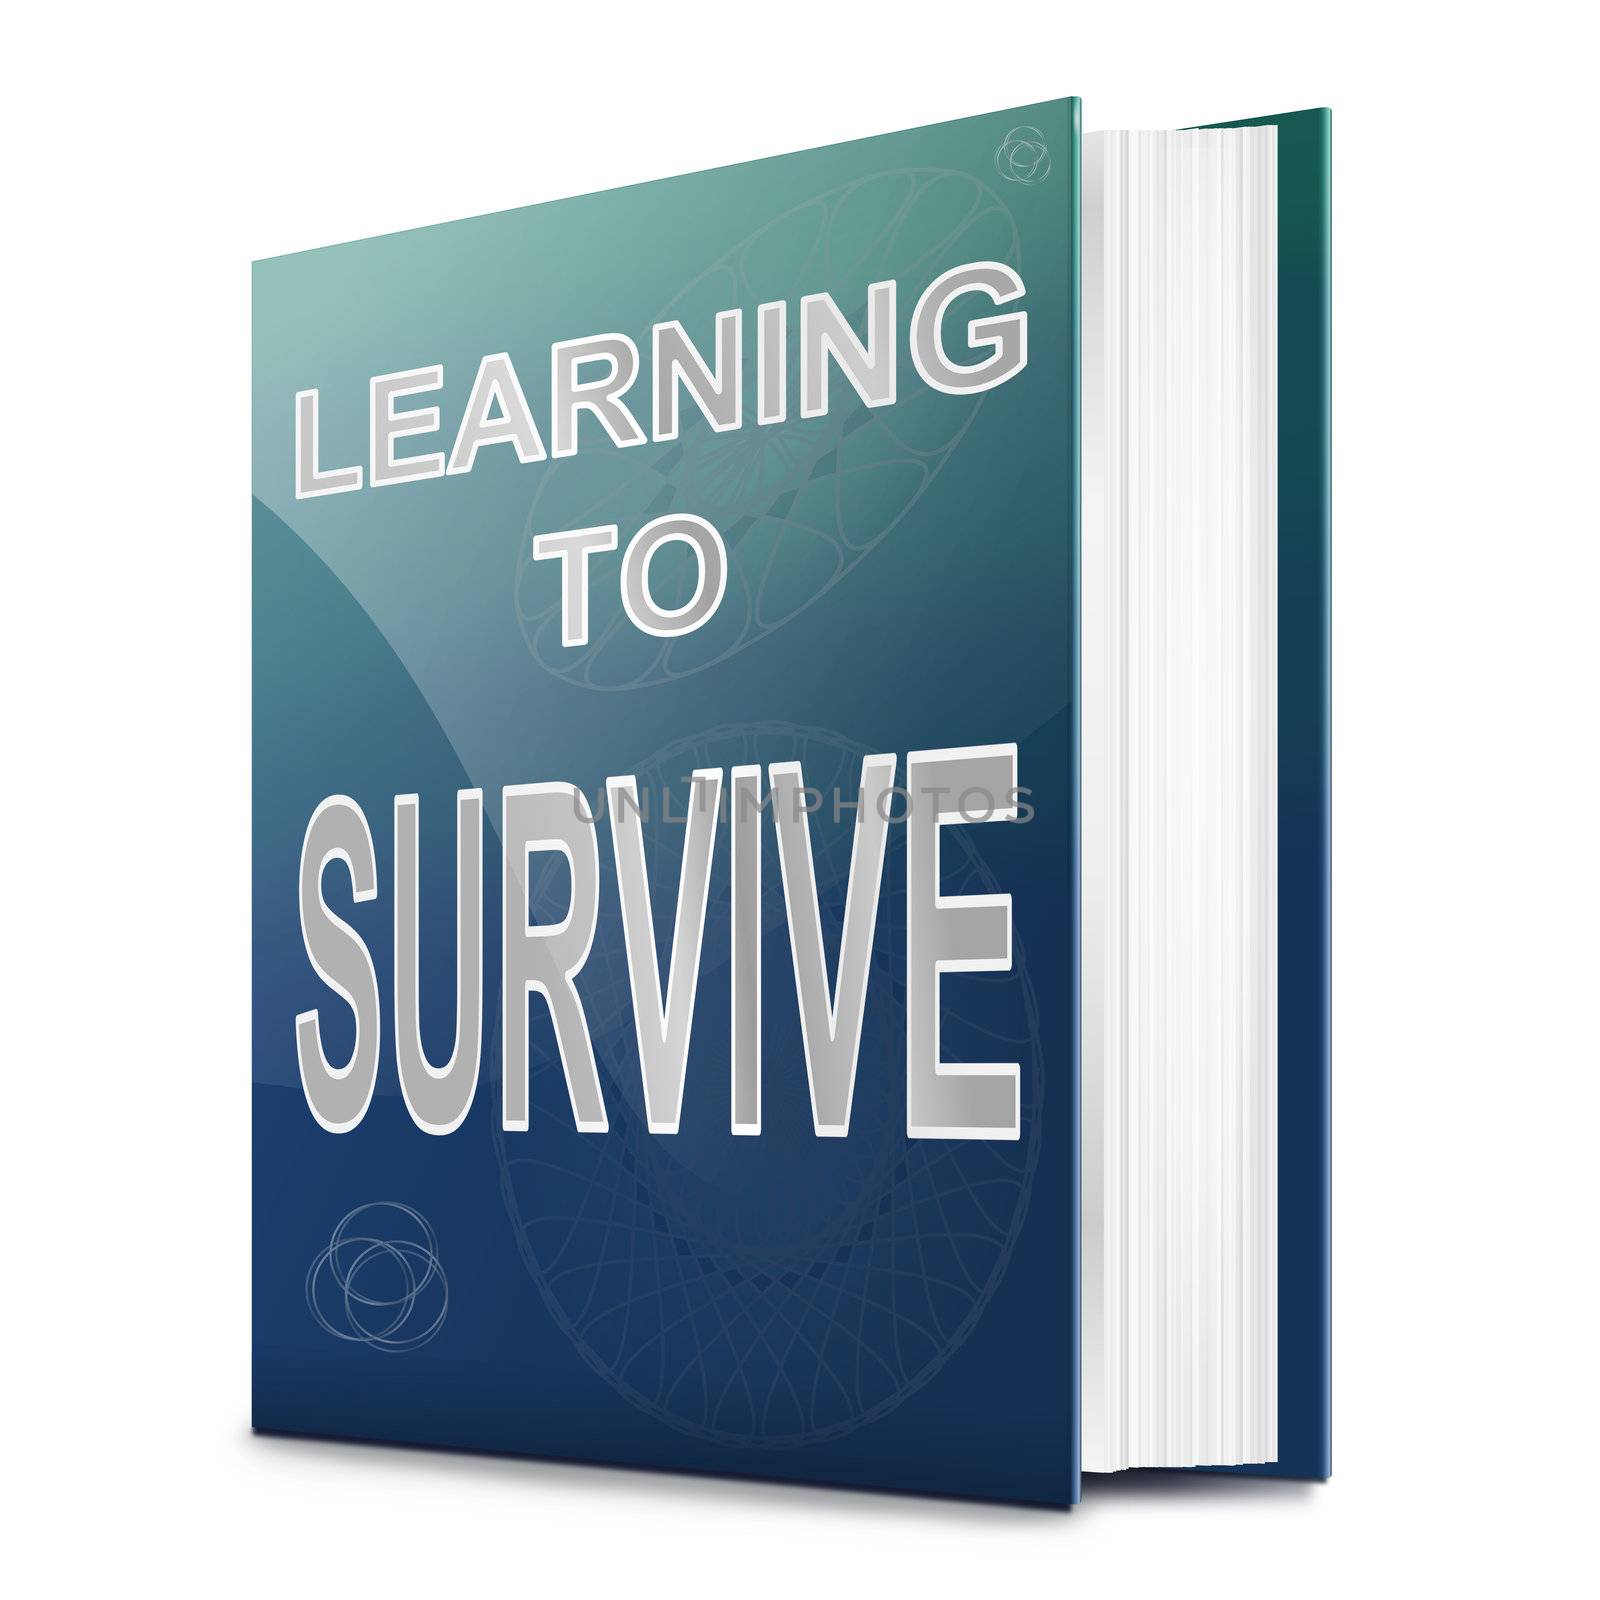 Illustration depicting a book with a learning to survive concept title. White background.